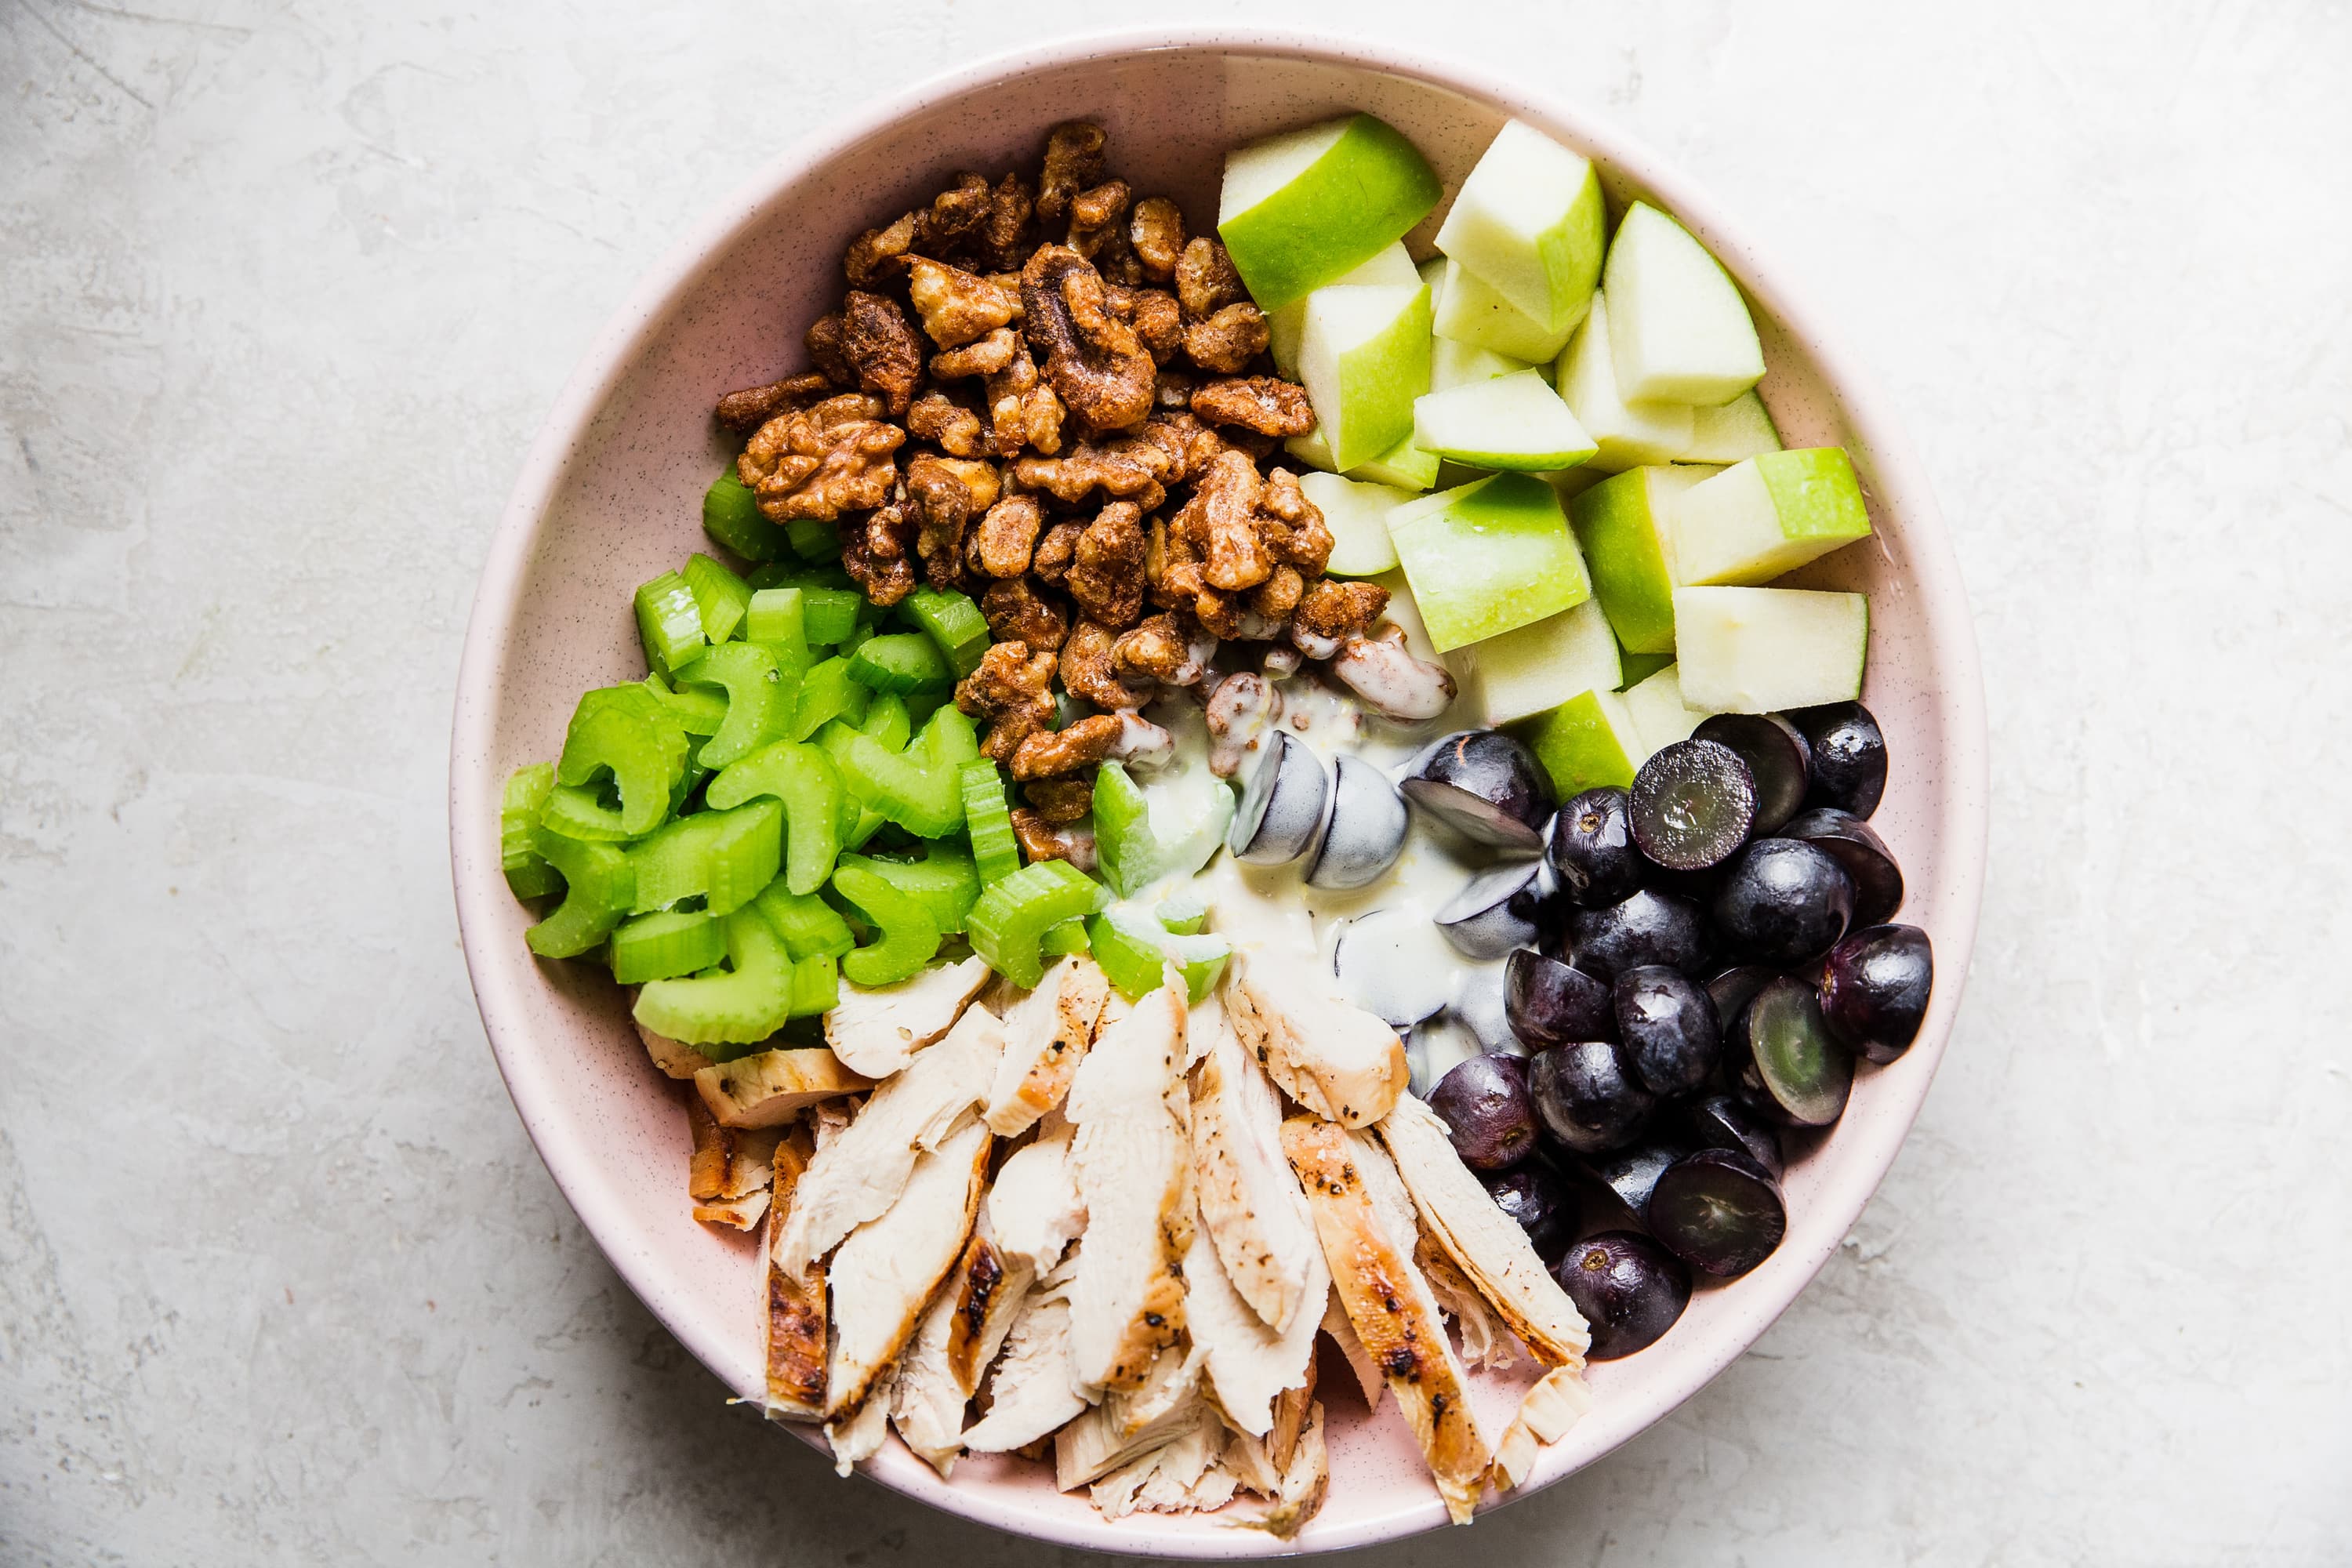 candied walnuts, grapes, apples, grilled chicken and celery in a bowl for a waldorf salad